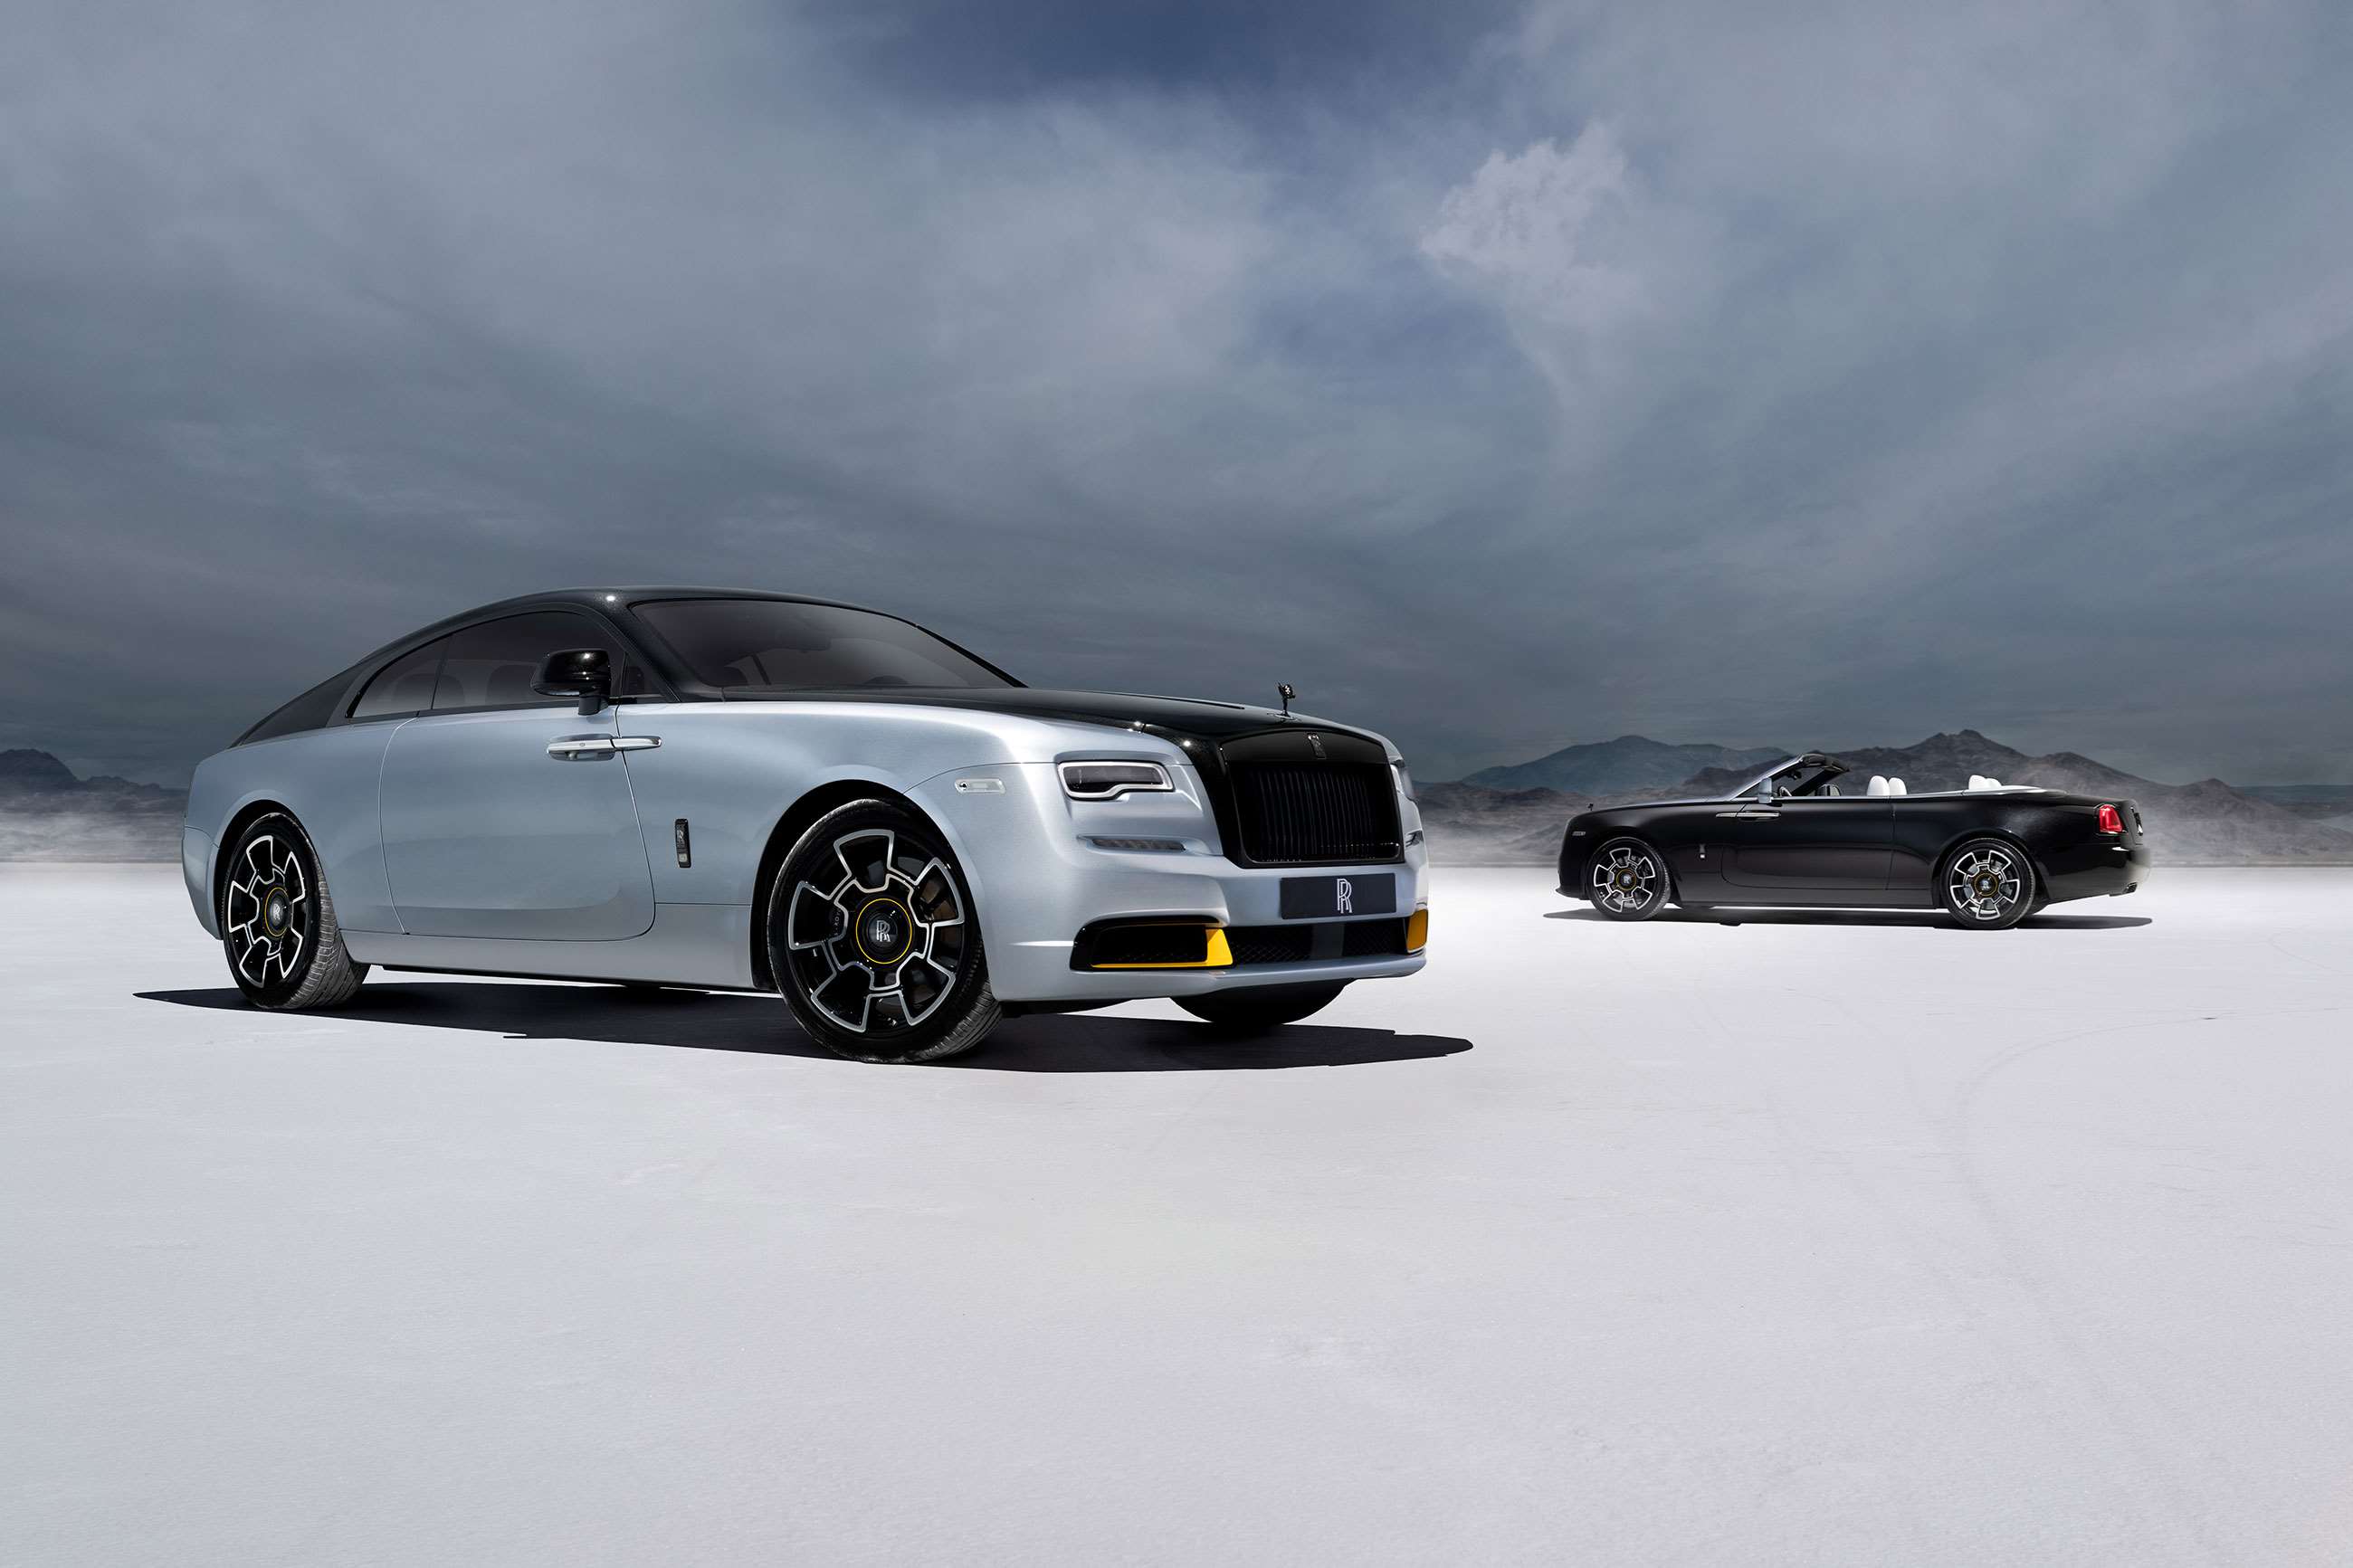 RollsRoyce Spectre Order Intake Far Better Than Expected CEO